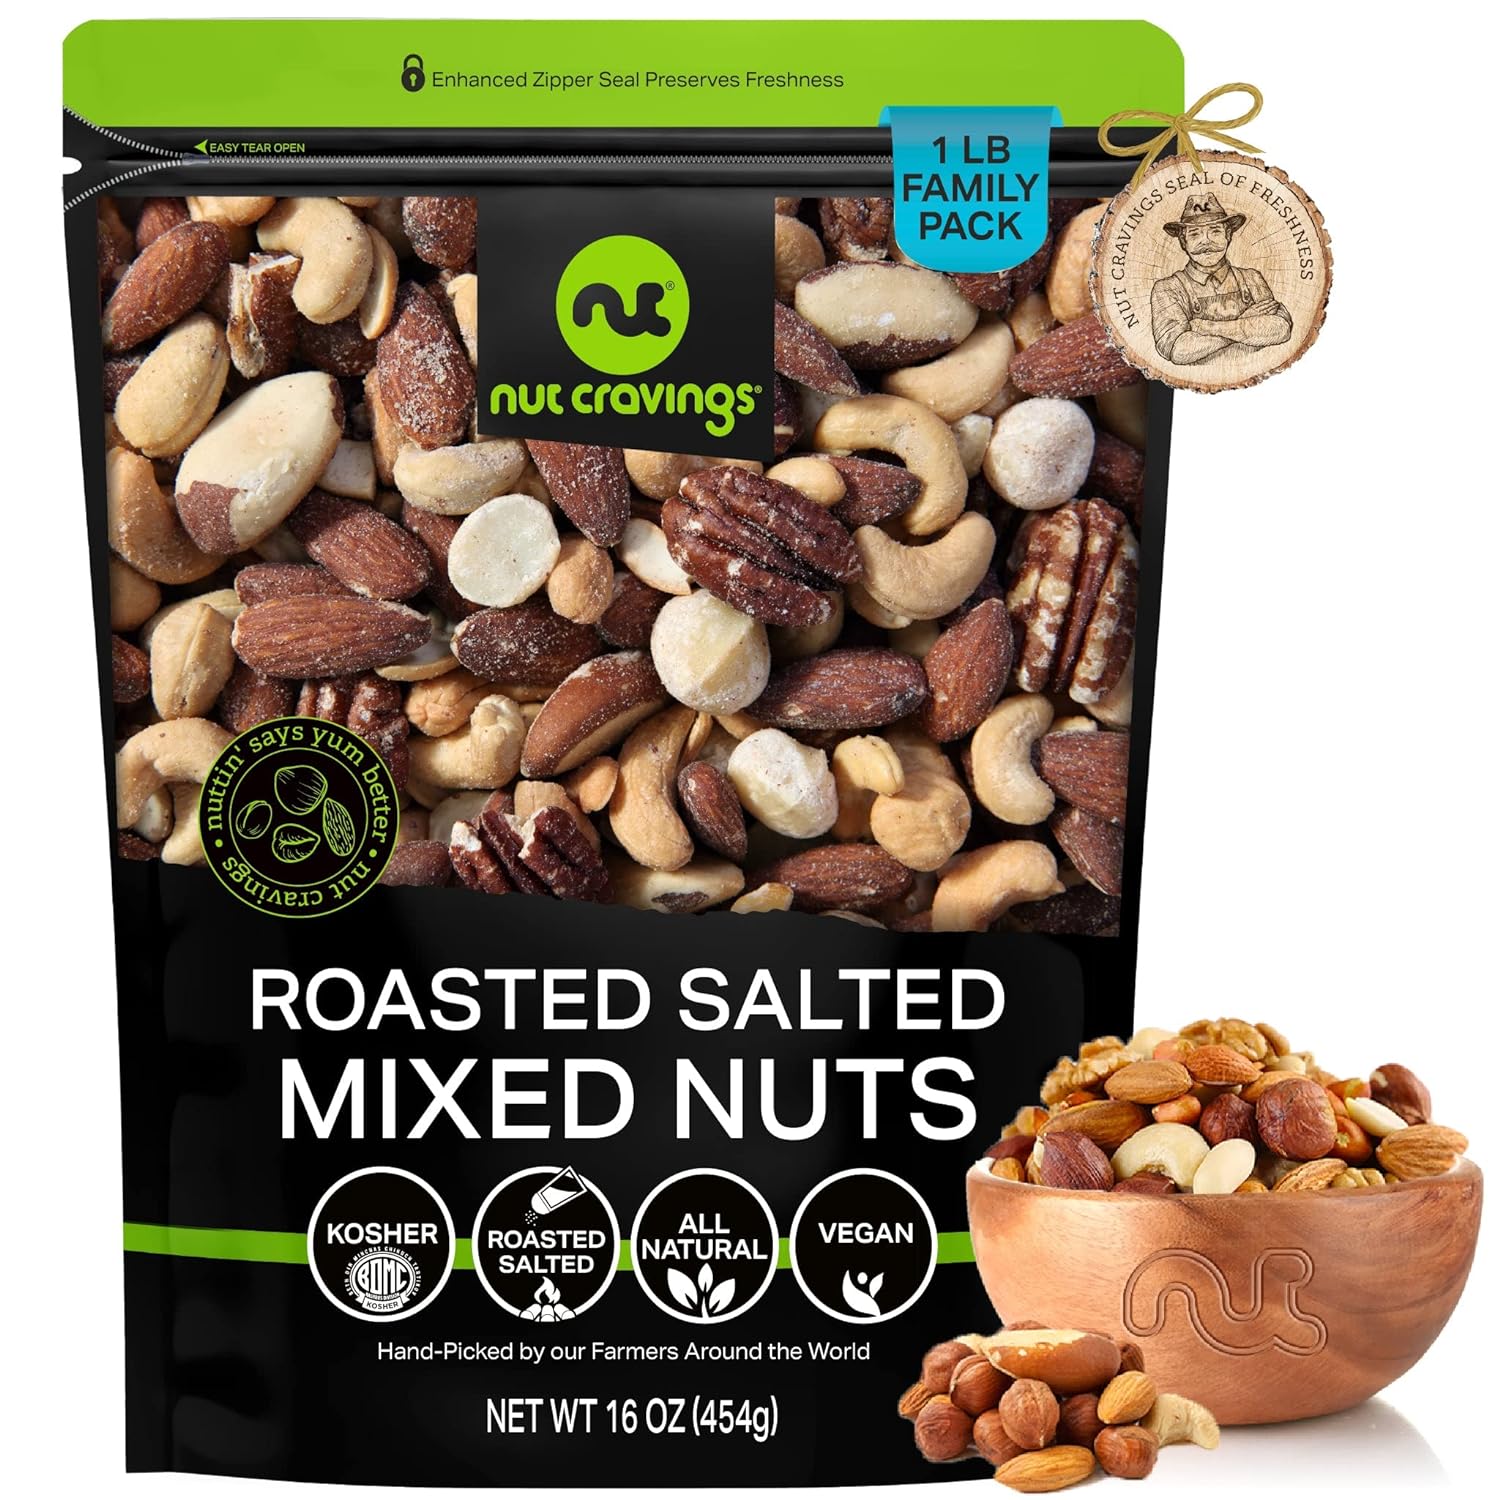 Nut Cravings - Roasted & Salted Mixed Nuts - Brazils, Brazil, Pecan, Almond, Hazelnut, Cashew (16oz - 1 LB) Packed Fresh in Resealable Bag - Healthy Protein Food, Natural, Keto Friendly, Vegan, Kosher